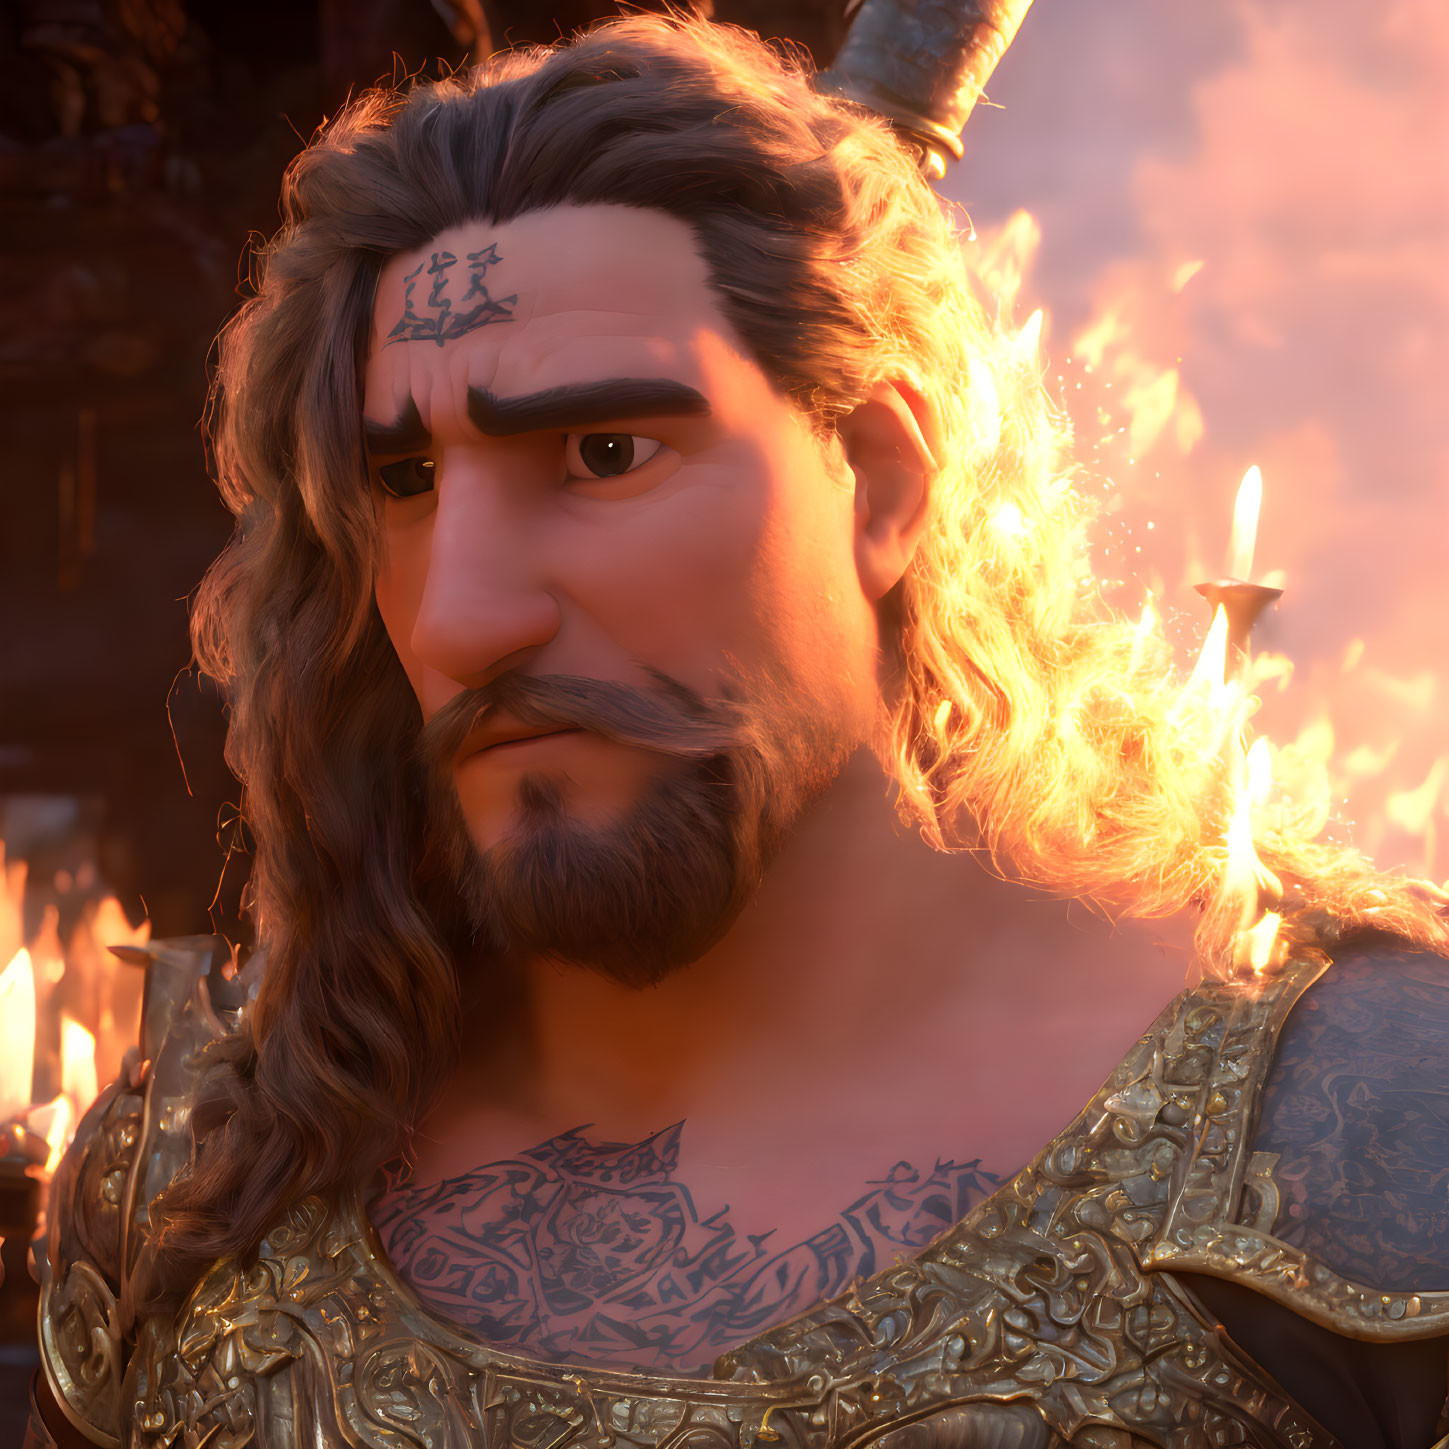 Animated character with marked forehead, long hair, armor, fiery backdrop